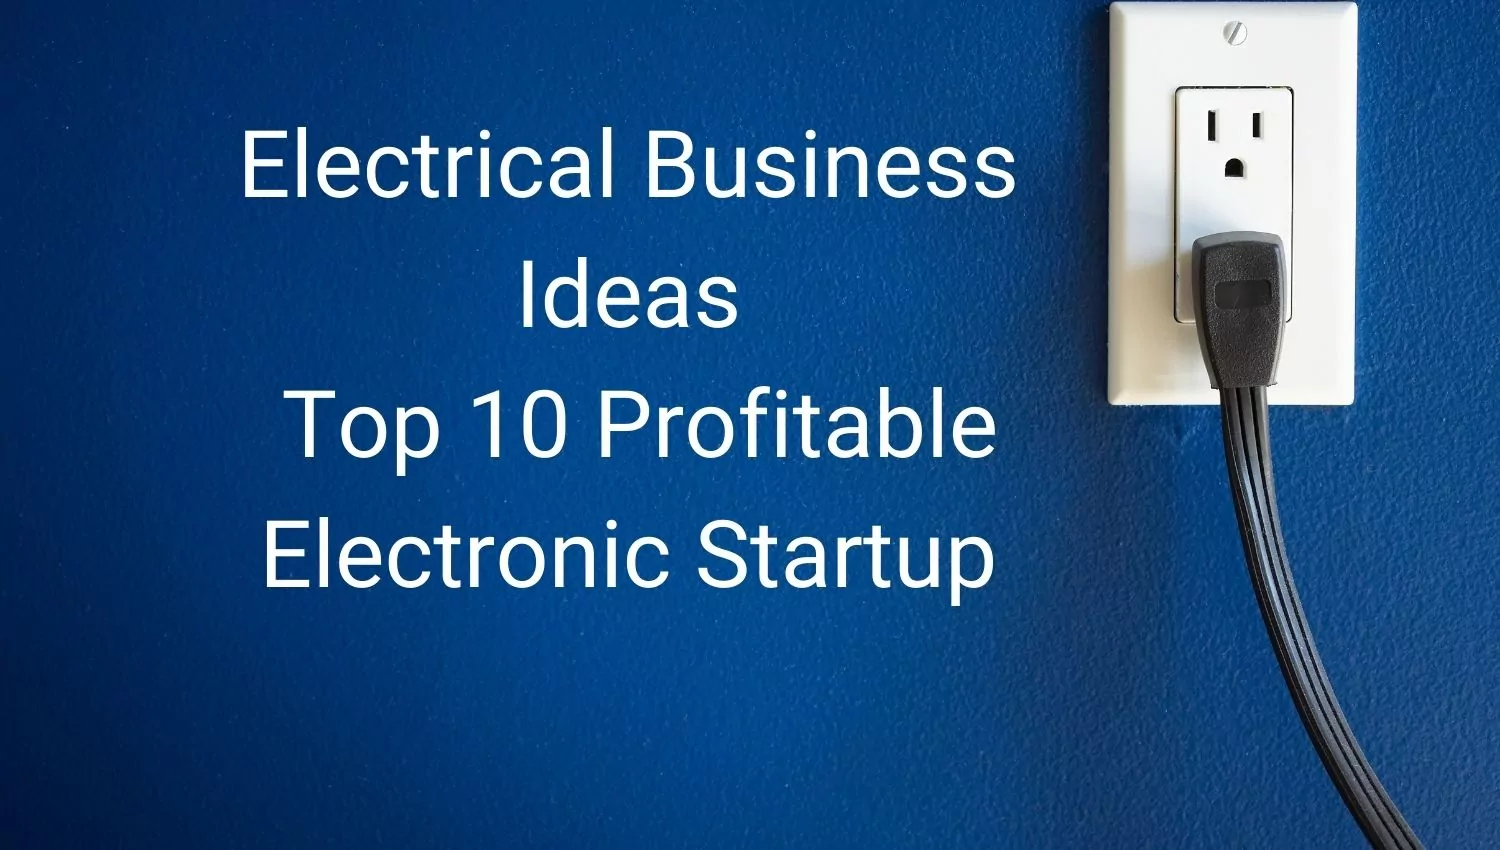 Electrical Business Ideas Top 10 Profitable Electronic Startup